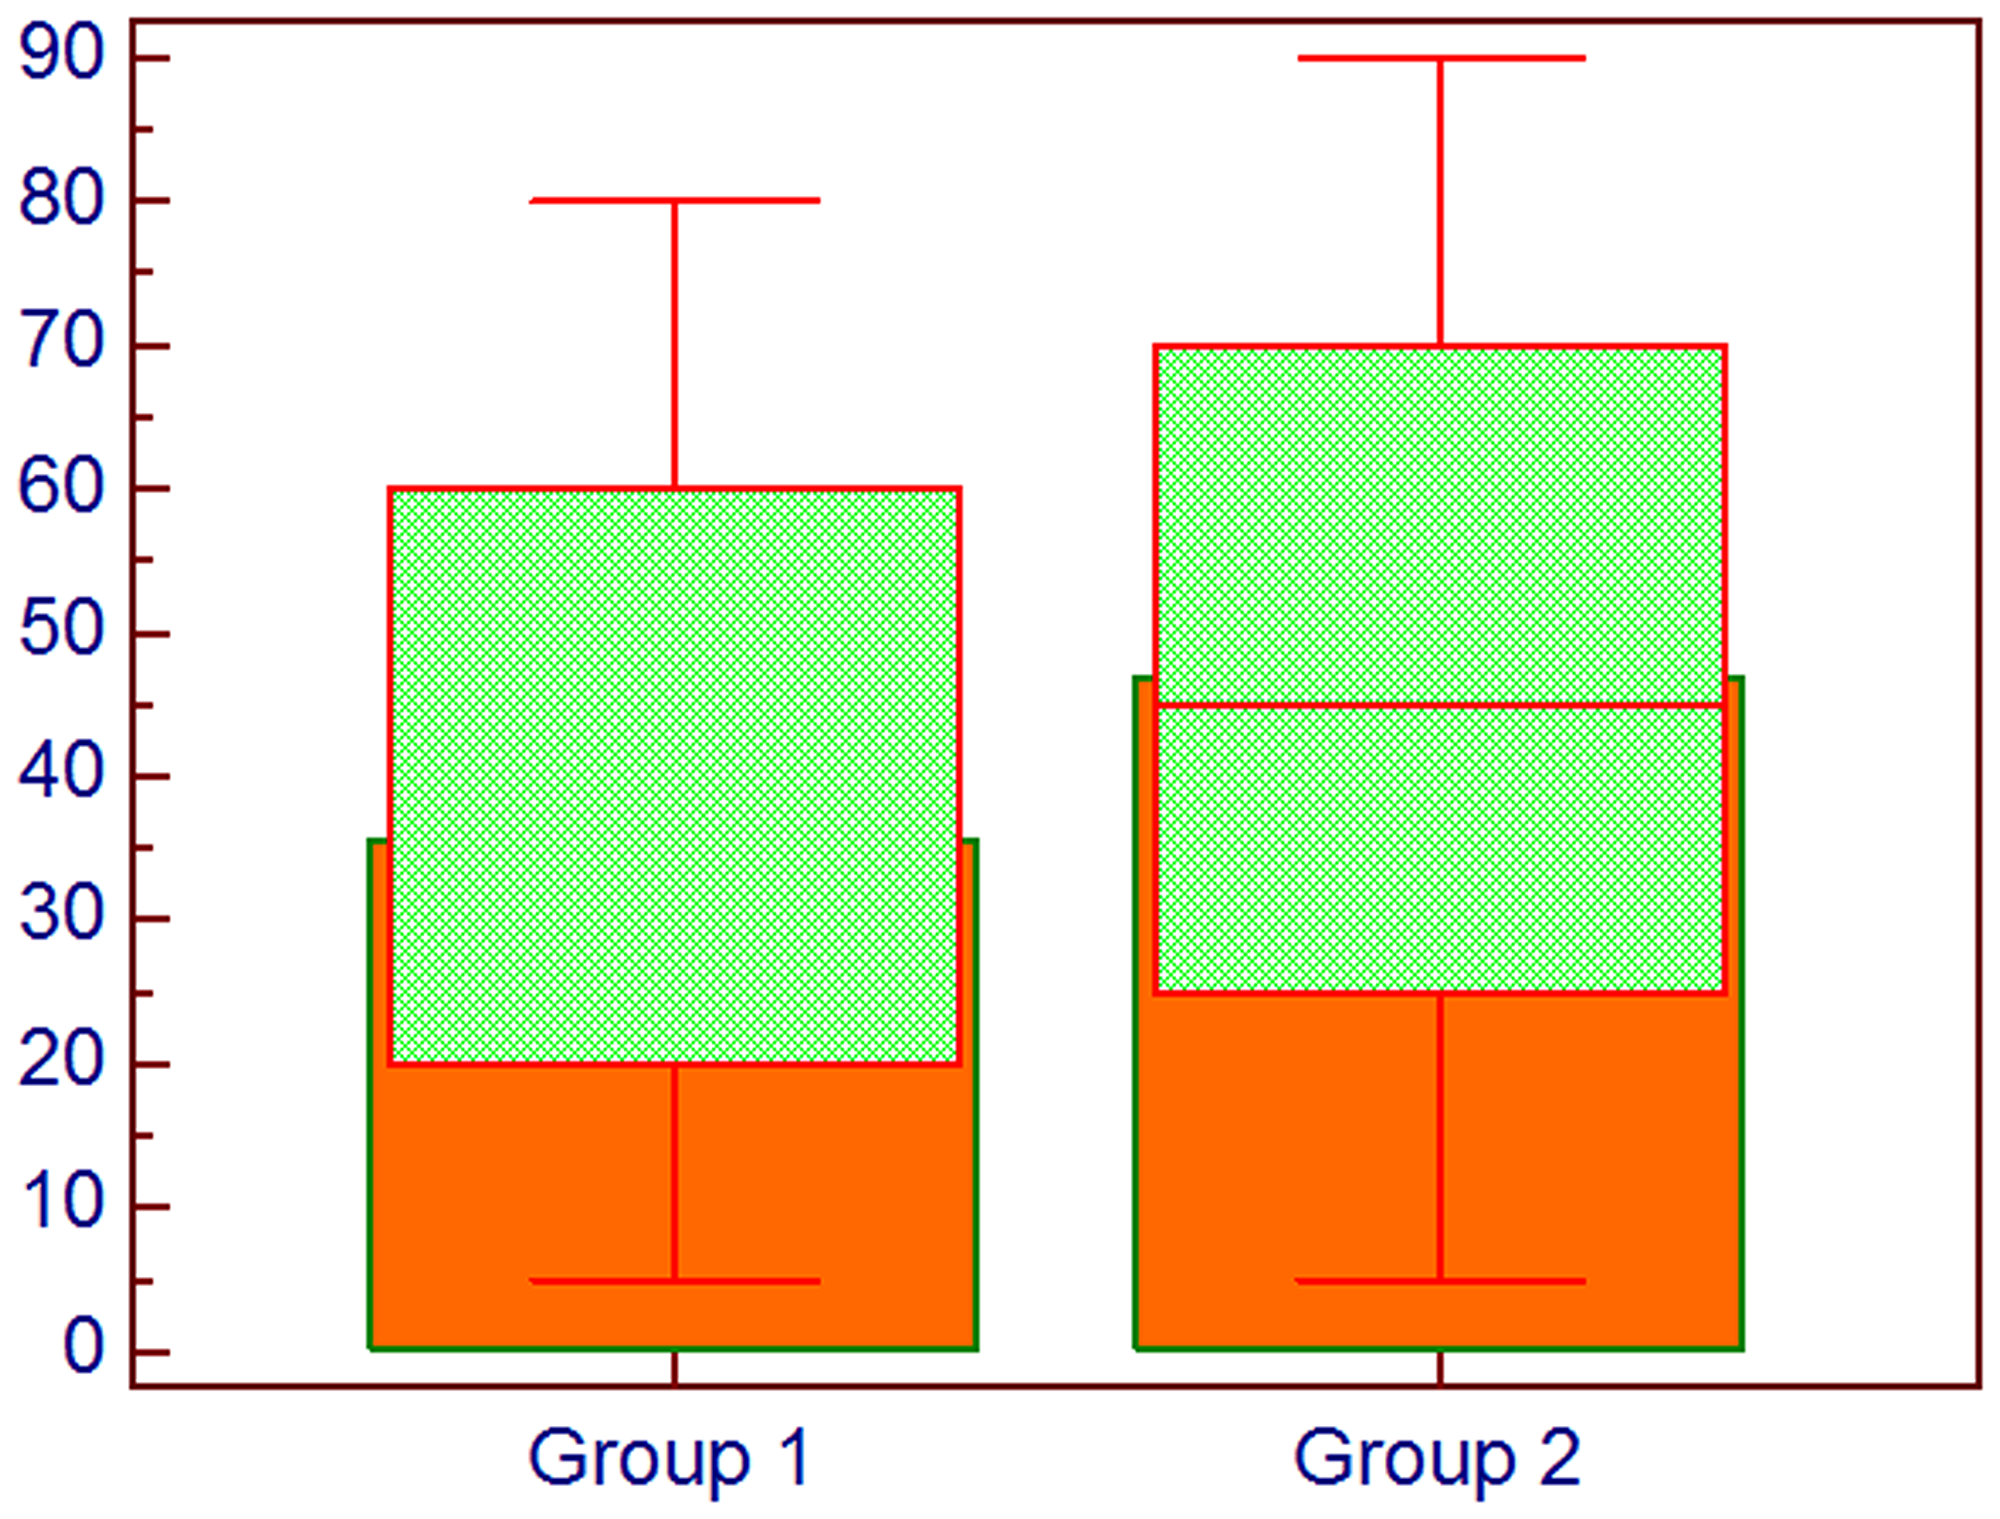 Comparison about percentage of cells expressing HIF-1α; Group 1: Lung cancer without bone metastases, Group 2: Lung cancer with bone metastases, Mann–Whitney U test.